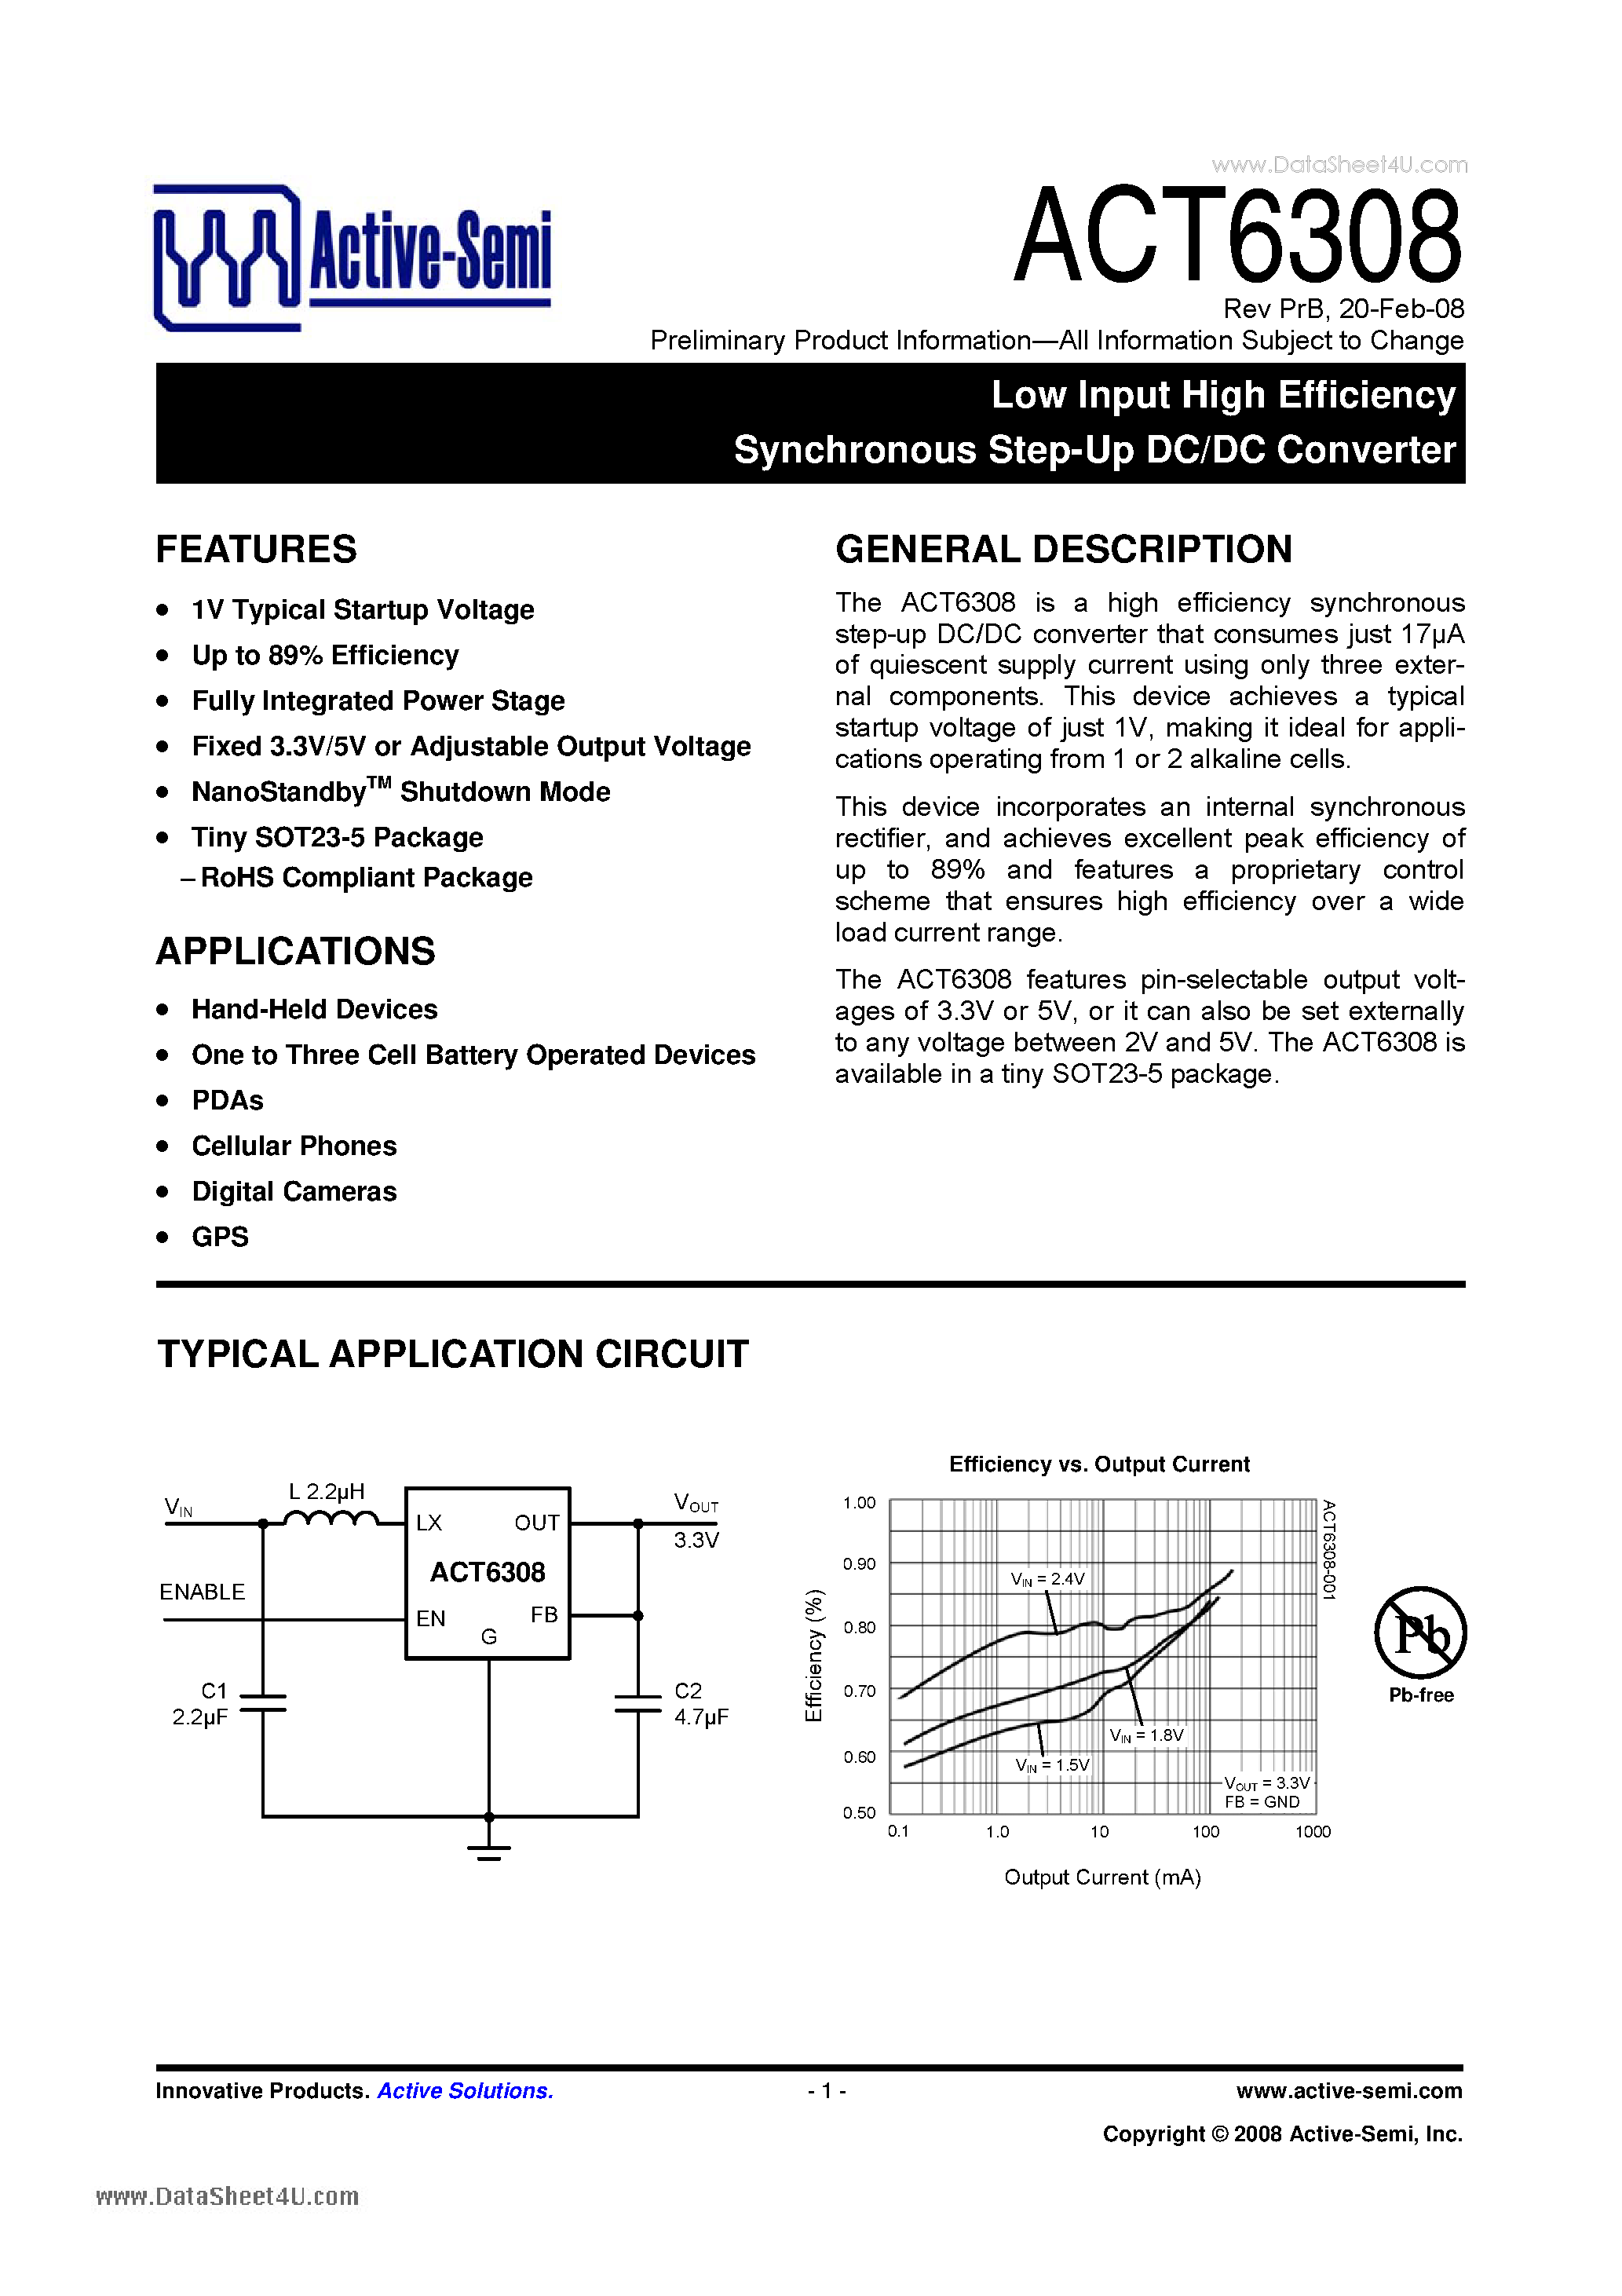 Datasheet ACT6308 - Low Input High Efficiency Synchronous Step-Up DC/DC Converter page 1